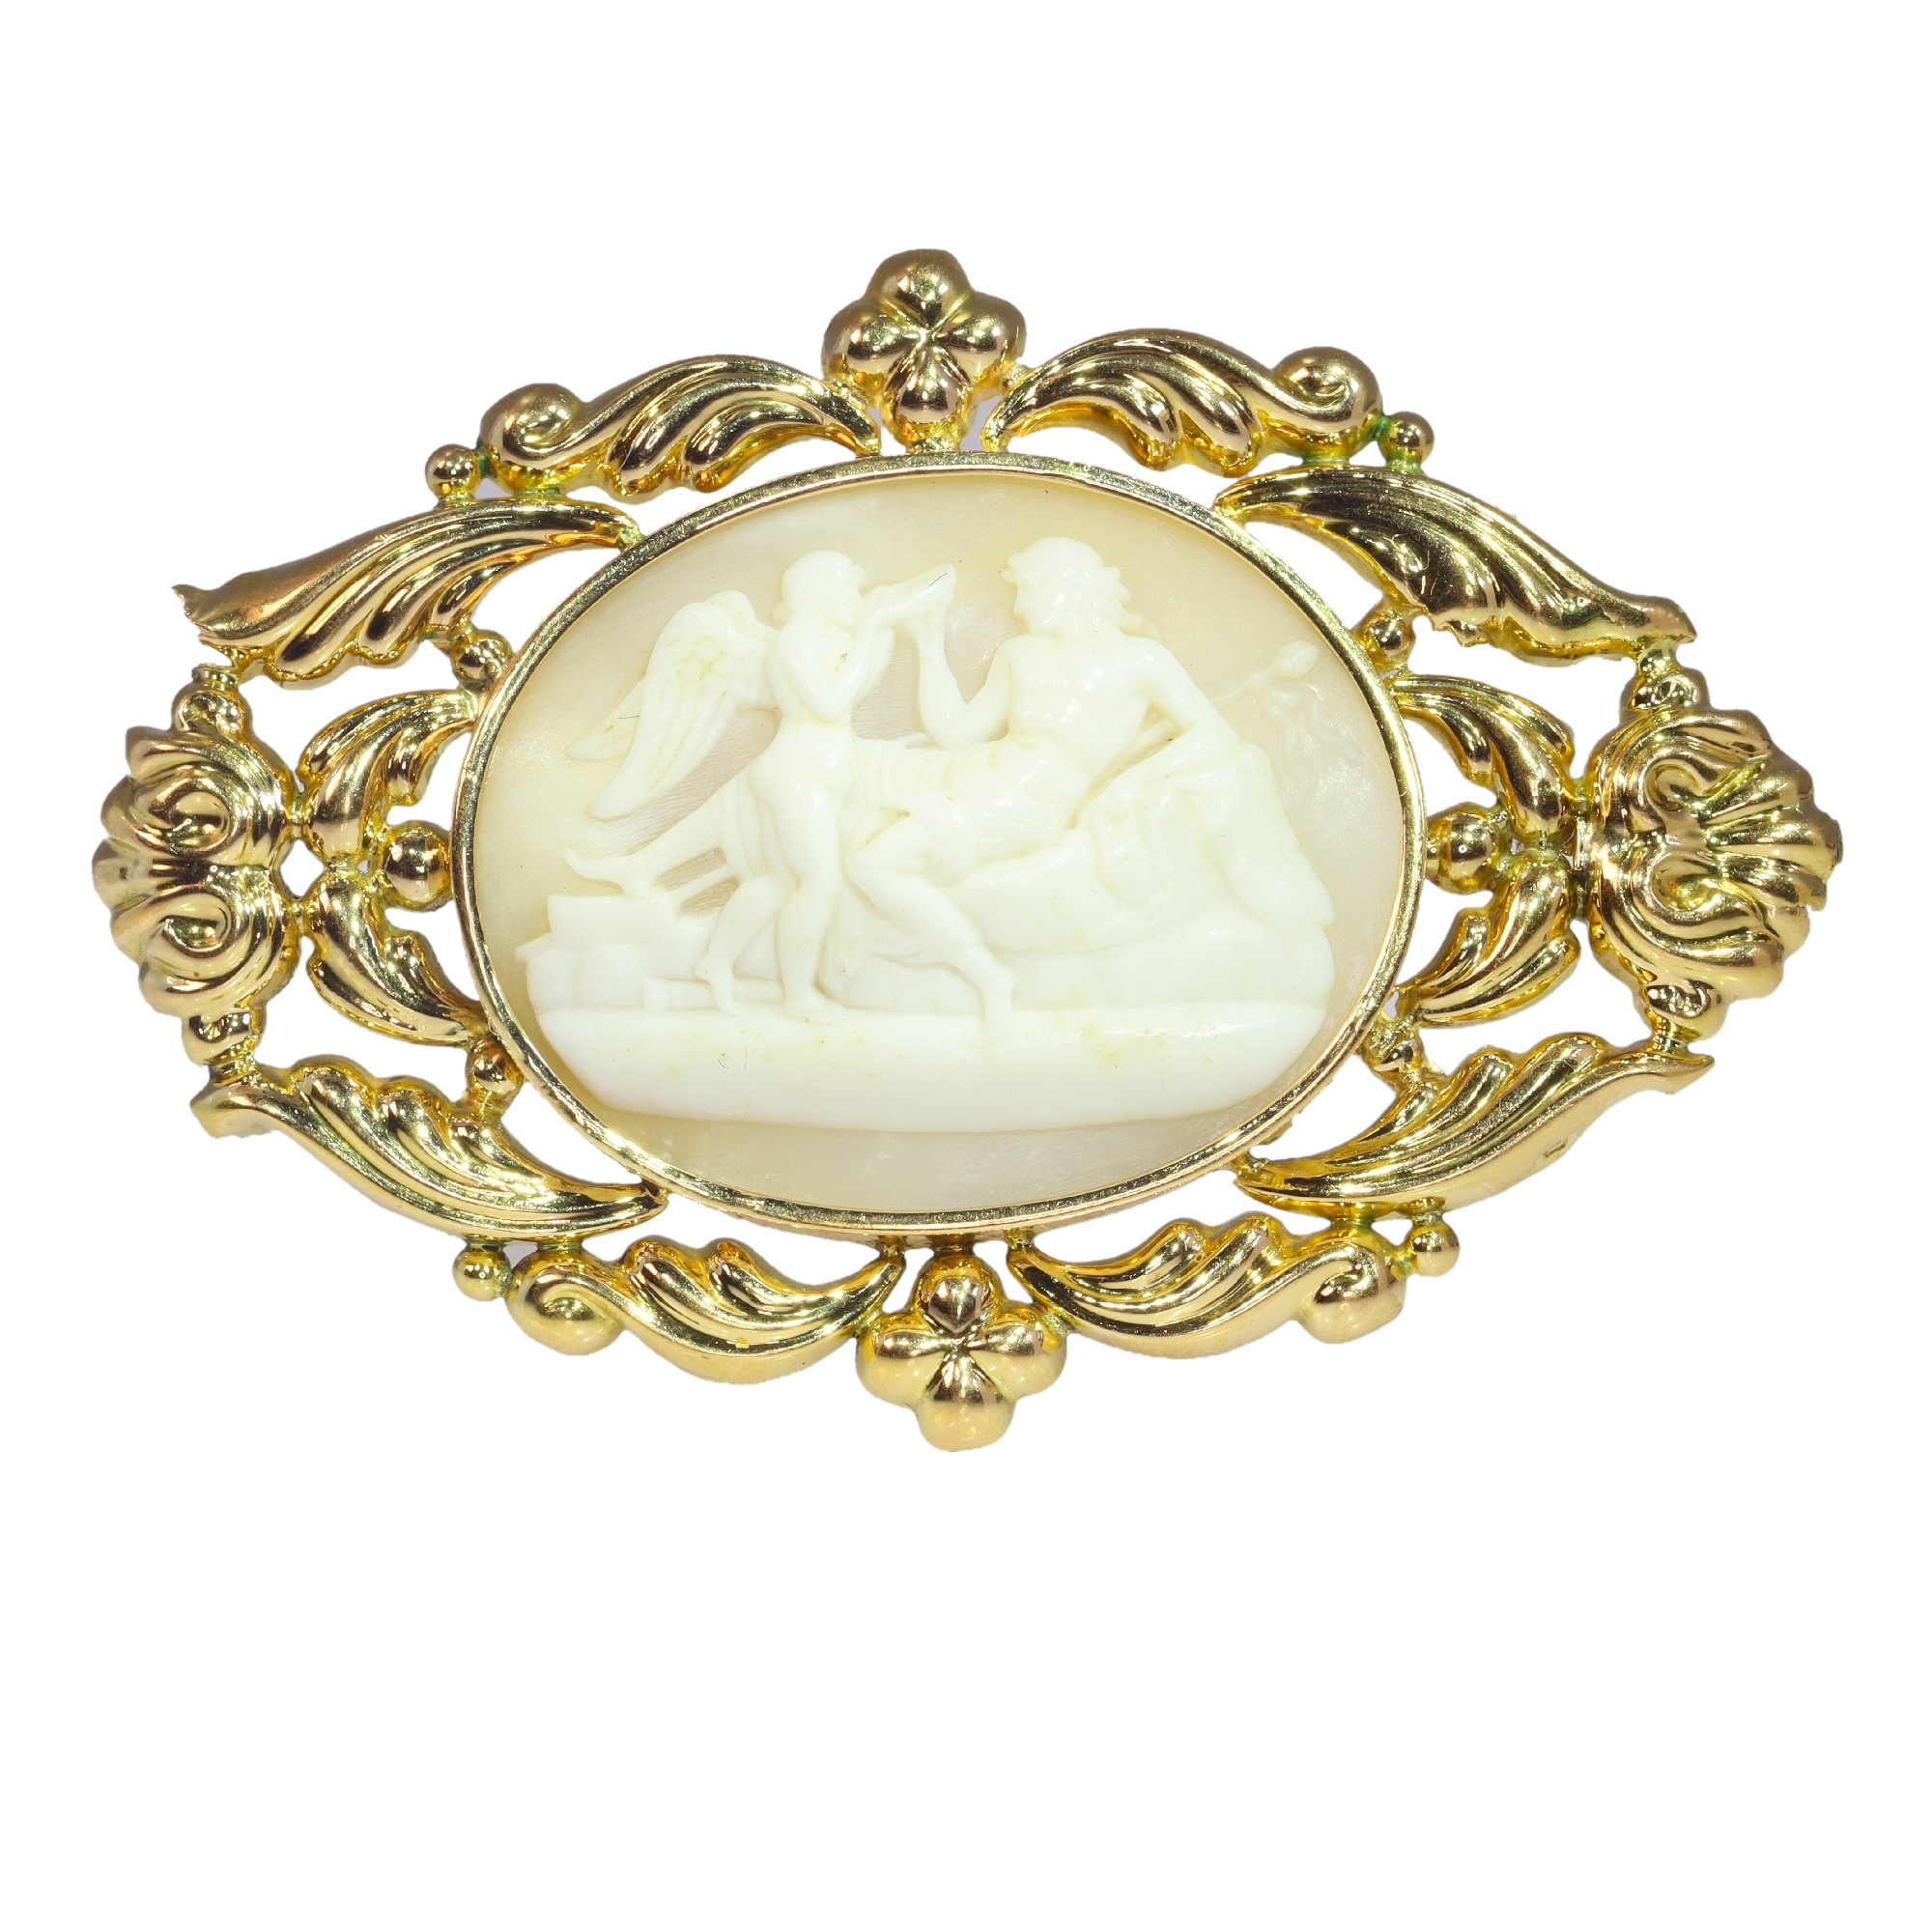 Antique 18K gold mounted cameo representing Bacchus offering Cupid a cup of wine, after Bertel Thorvaldsen